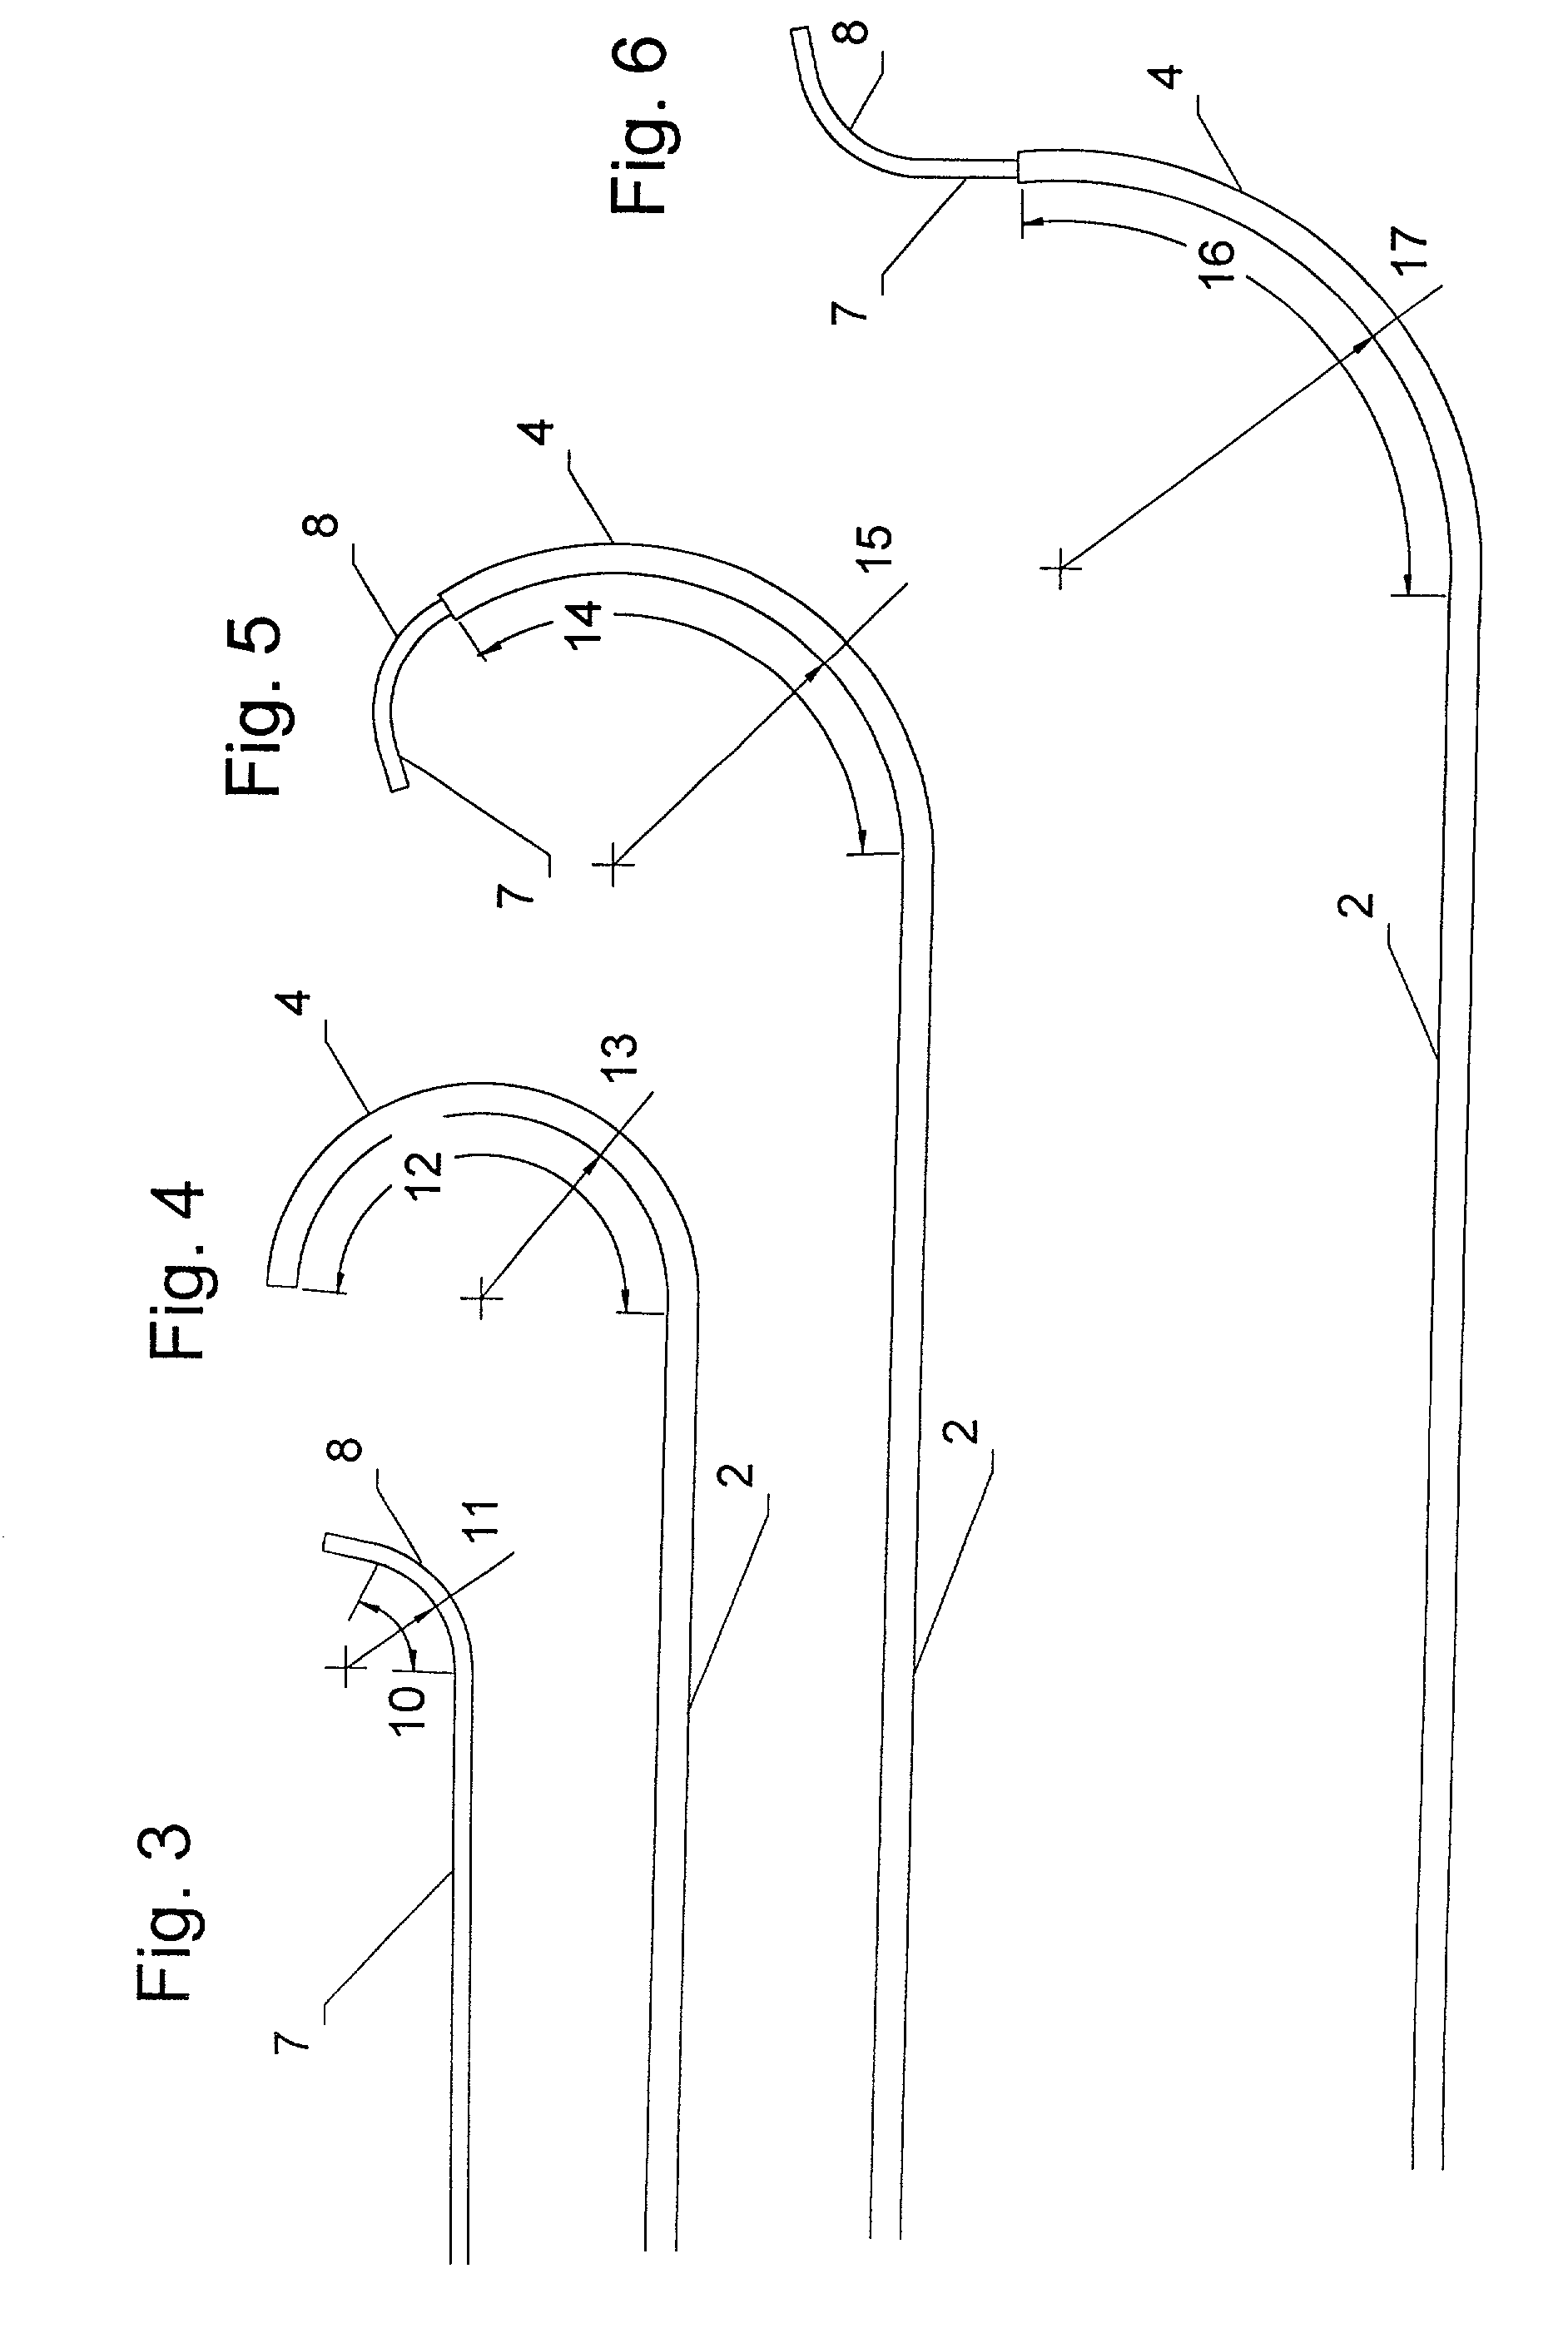 Inner and outer telescoping catheter delivery system